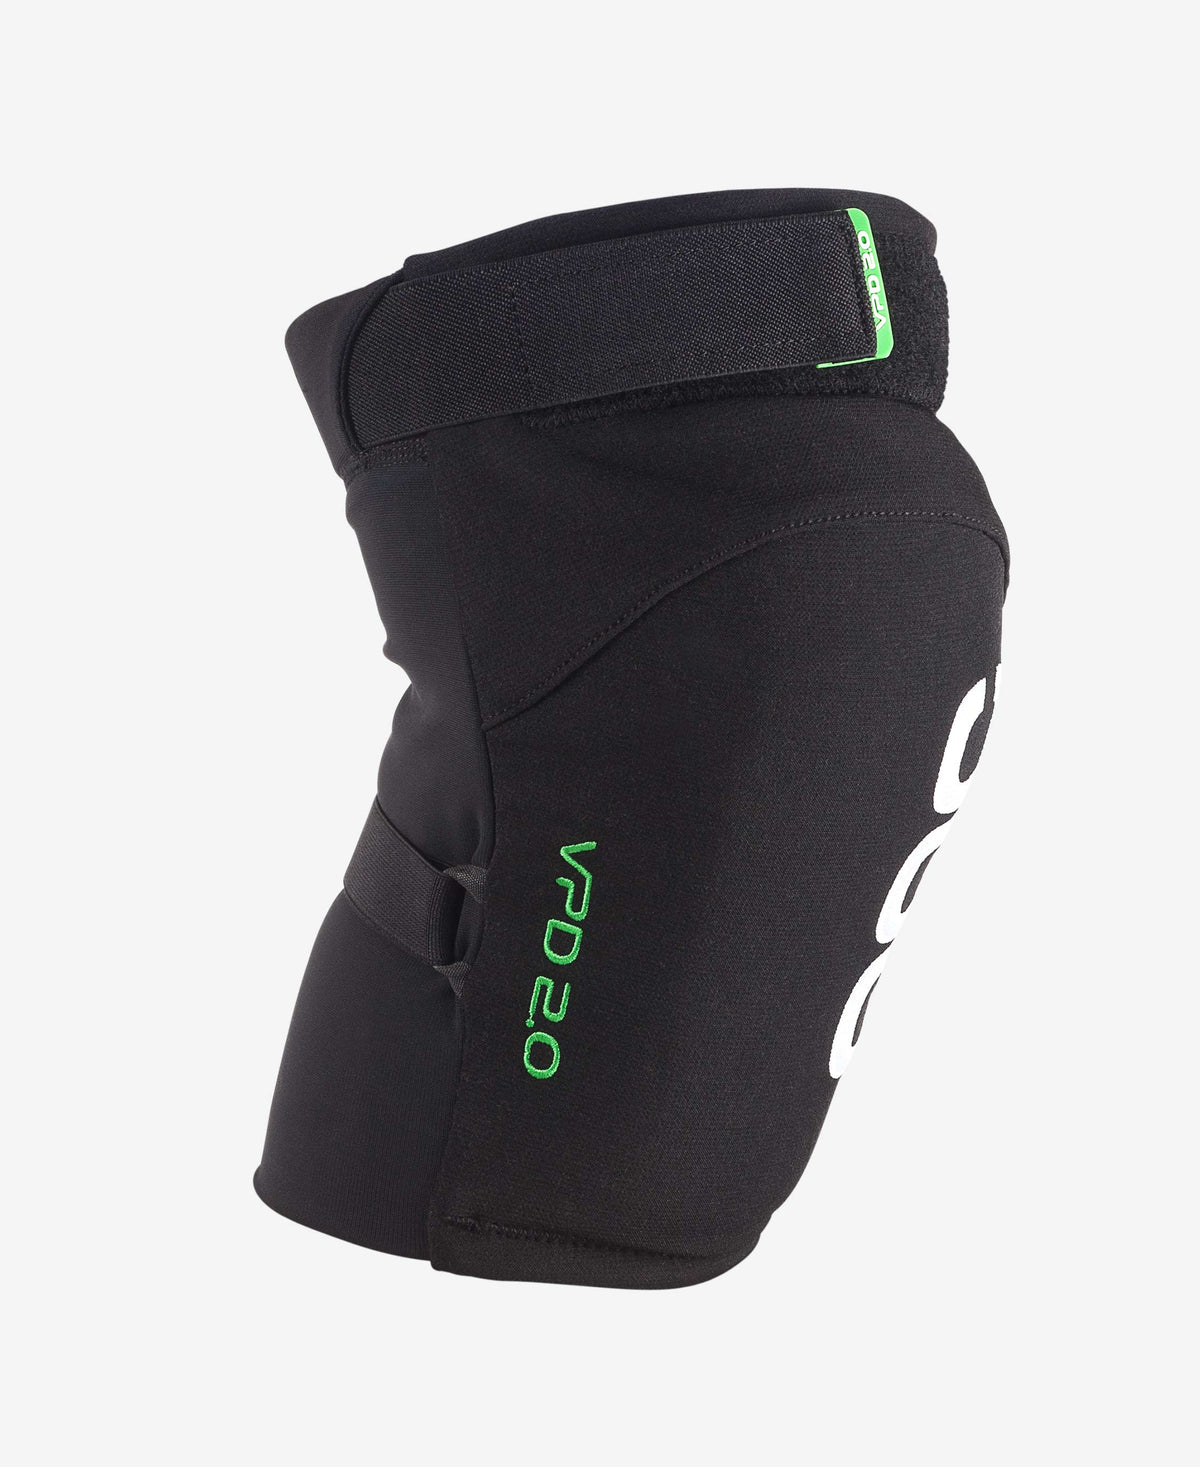 POC JOINT VPD 2.0 KNEE PROTECTION